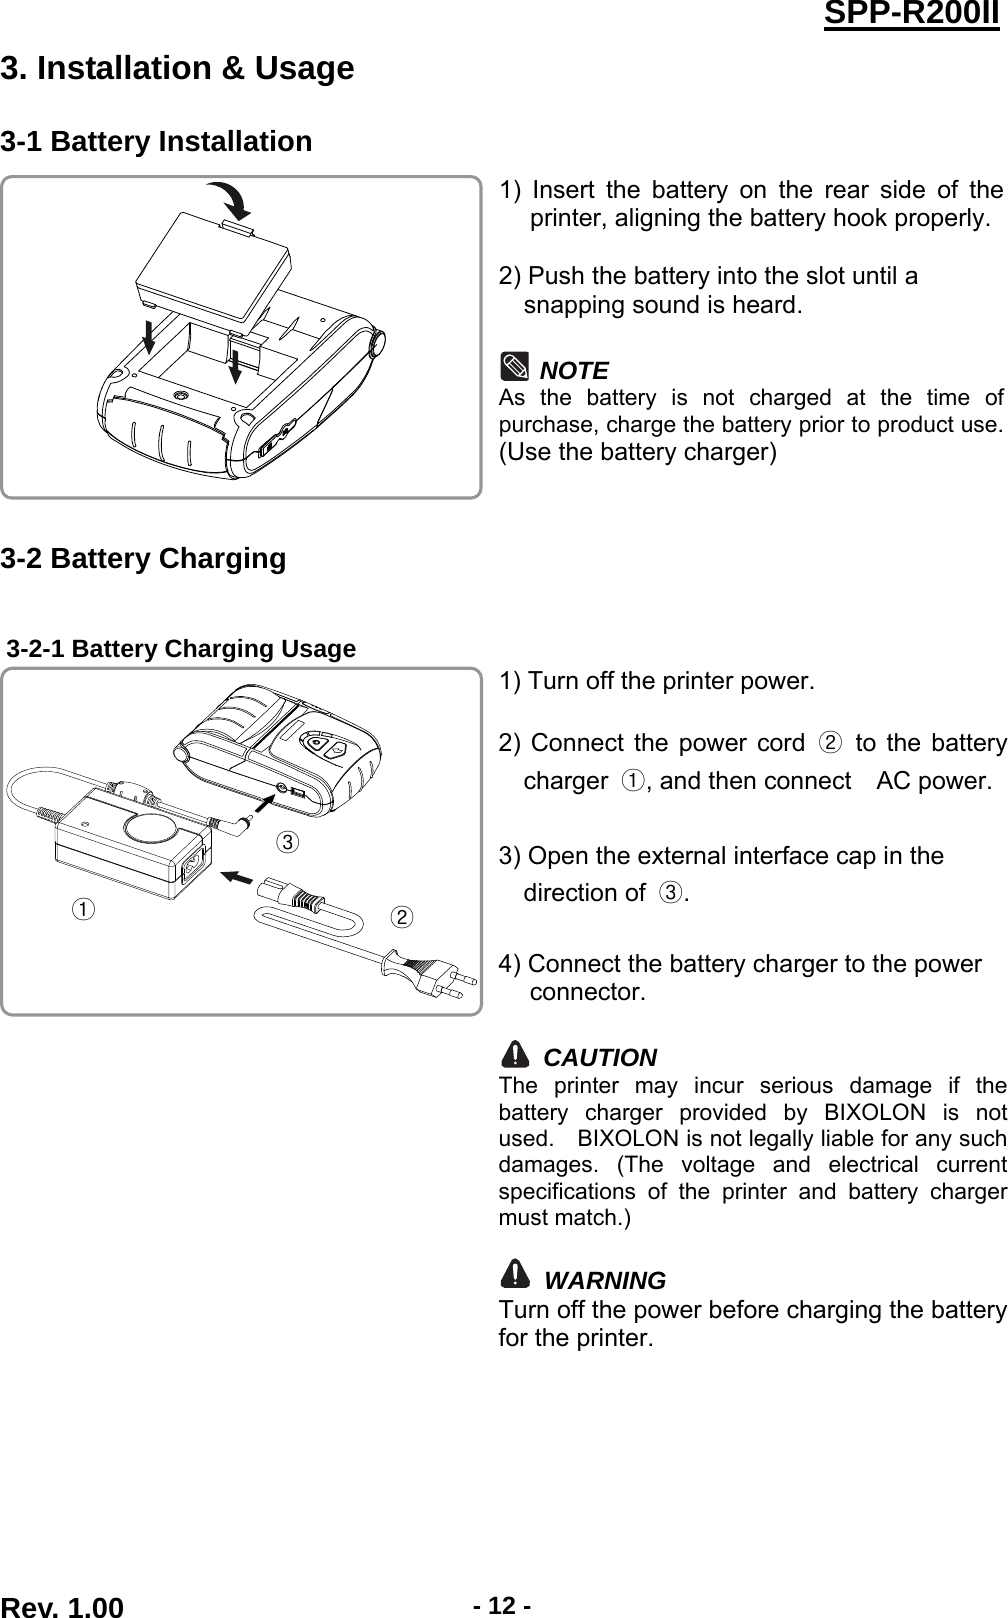  Rev. 1.00  - 12 -SPP-R200II3. Installation &amp; Usage 3-1 Battery Installation 1) Insert the battery on the rear side of the printer, aligning the battery hook properly.  2) Push the battery into the slot until a   snapping sound is heard.  NOTE As the battery is not charged at the time of purchase, charge the battery prior to product use. (Use the battery charger)  3-2 Battery Charging  3-2-1 Battery Charging Usage 1) Turn off the printer power.  2) Connect the power cord ② to the battery charger  ①, and then connect    AC power.  3) Open the external interface cap in the   direction of  ③.  4) Connect the battery charger to the power connector.  CAUTION The printer may incur serious damage if the battery charger provided by BIXOLON is not used.    BIXOLON is not legally liable for any such damages. (The voltage and electrical current specifications of the printer and battery charger must match.)   WARNING Turn off the power before charging the battery for the printer.  ① ② ③ 